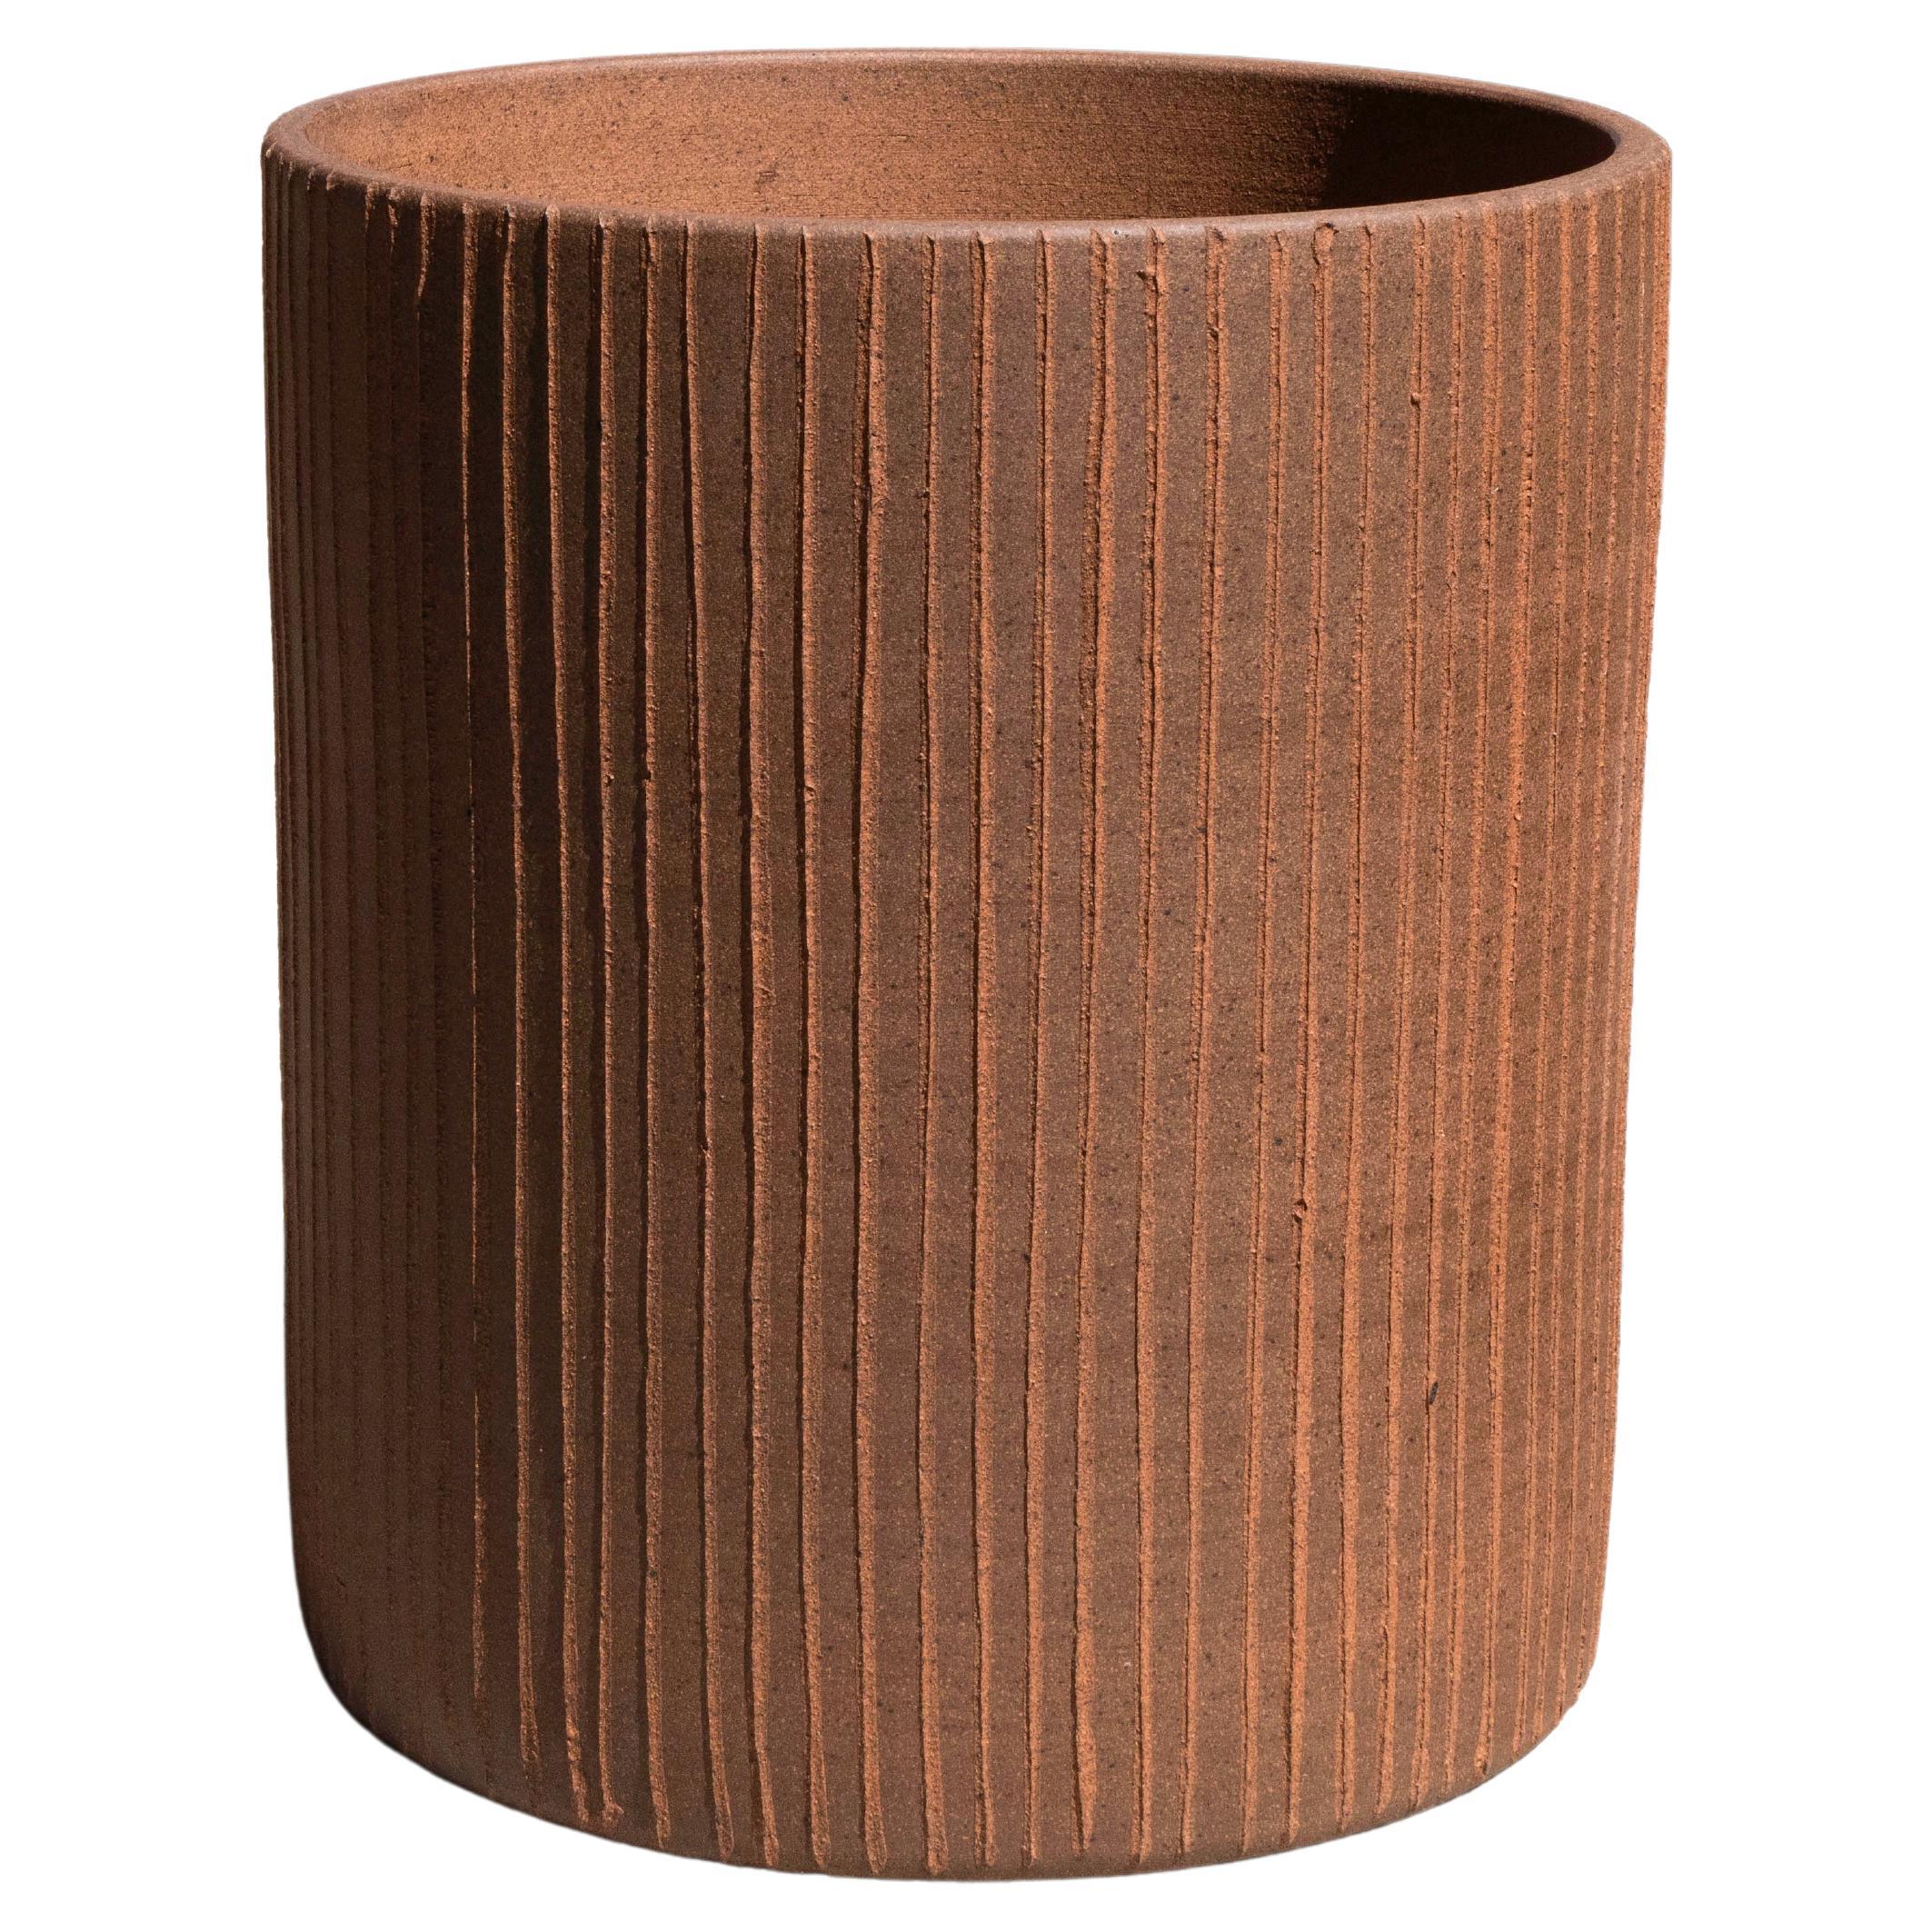 David Cressey Pro Artisan "Linear" Large Cylinder Planter, Architectural Pottery